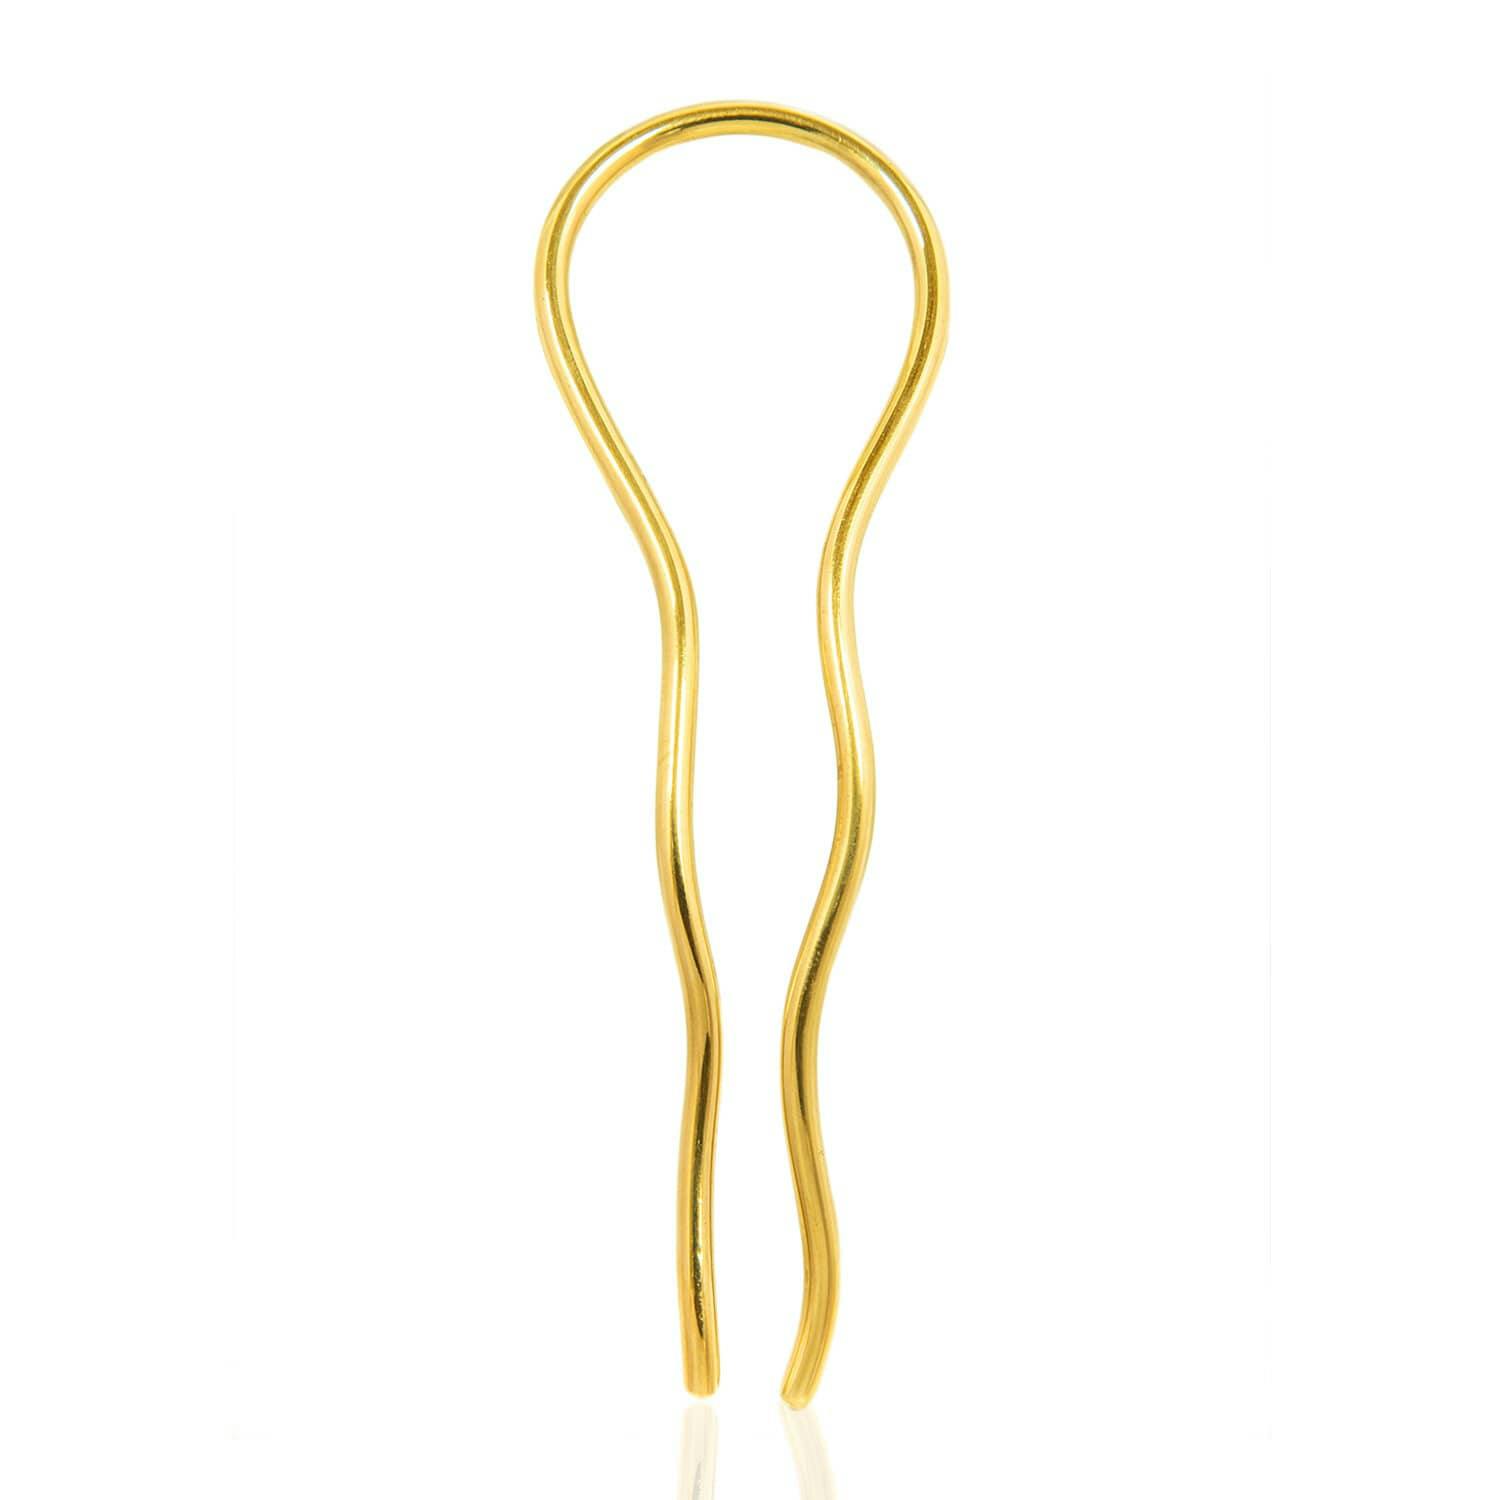 Masego Hairpin, a product by Adele Dejak